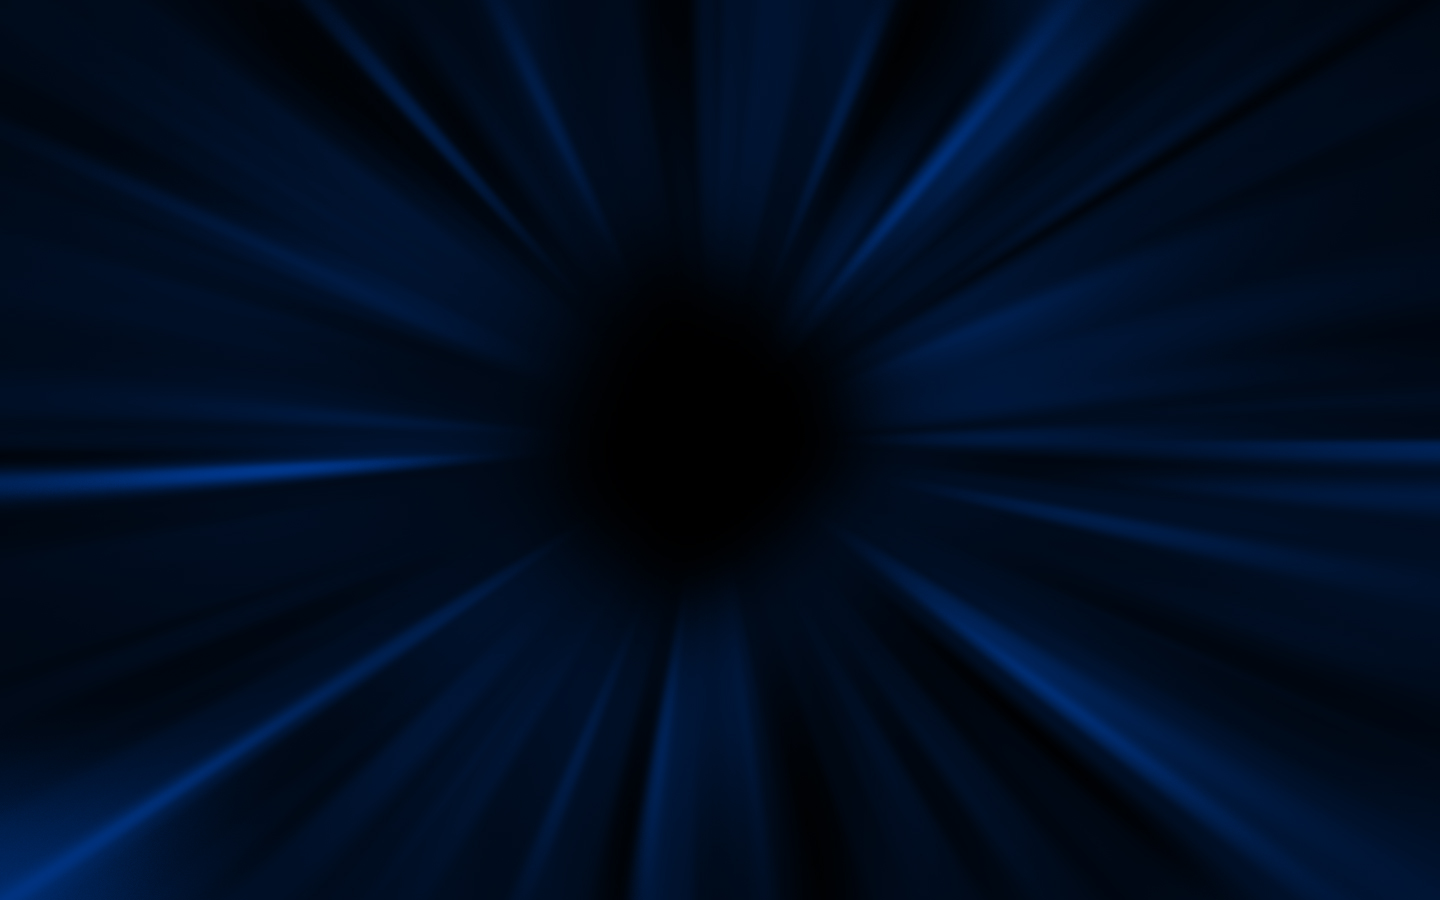 Dark Blue Abstract Painting 13 Wallpaper Background Hd 1440900